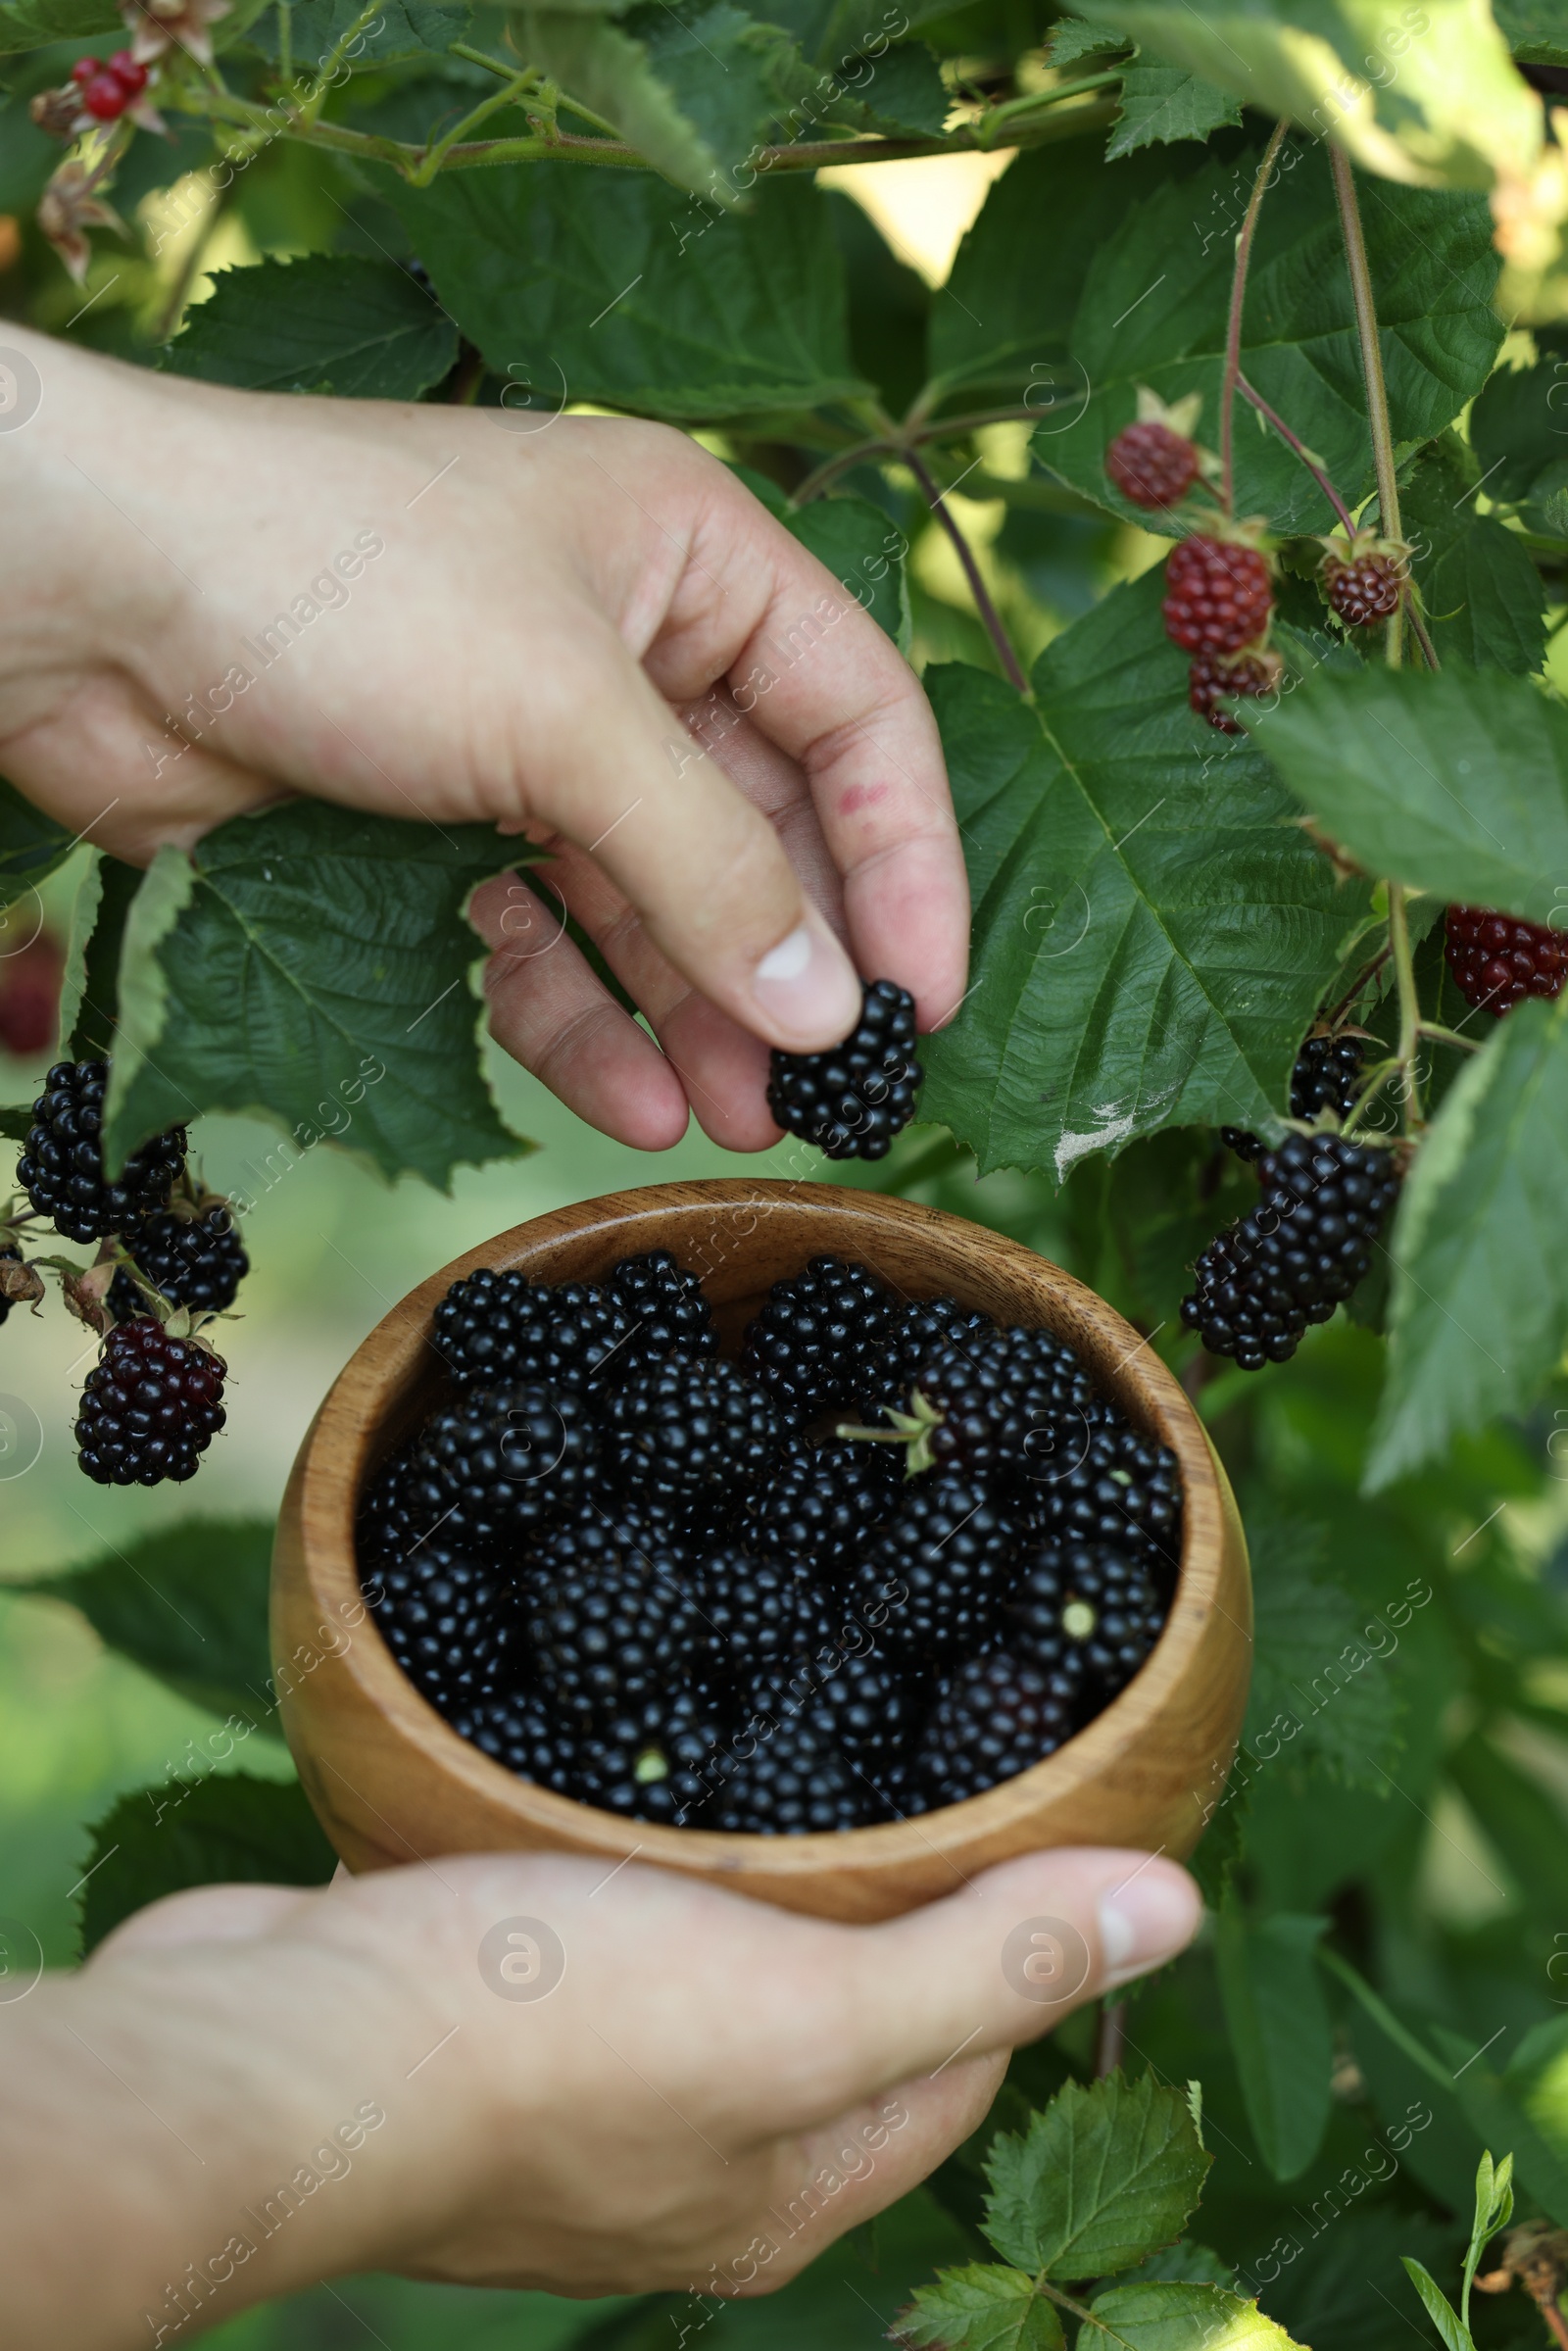 Photo of Woman with wooden bowl picking ripe blackberries from bush outdoors, closeup